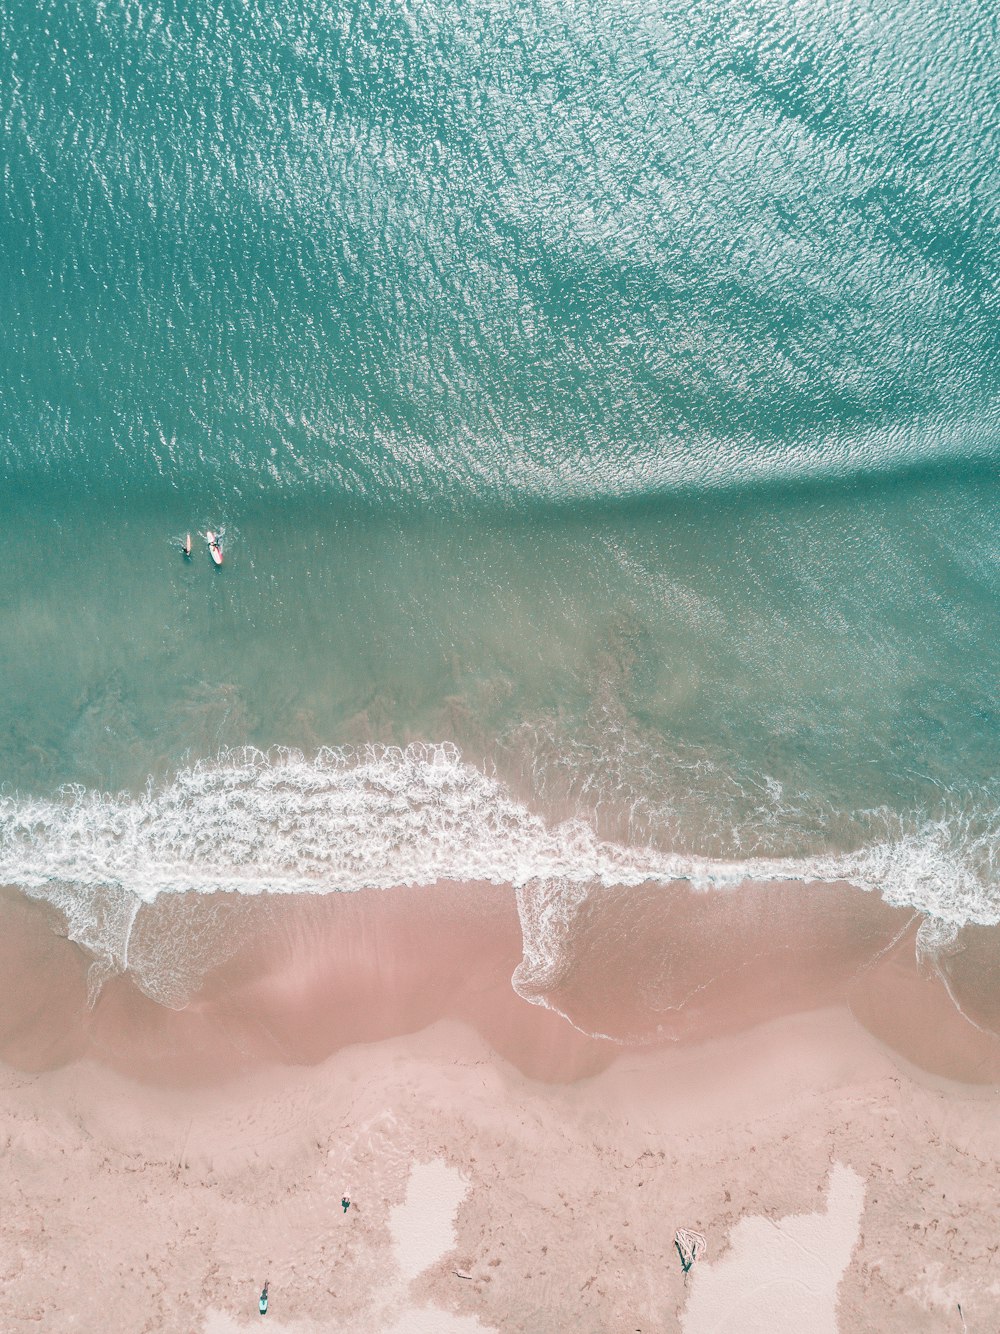 aerial photography of people surfing on seashore during daytime